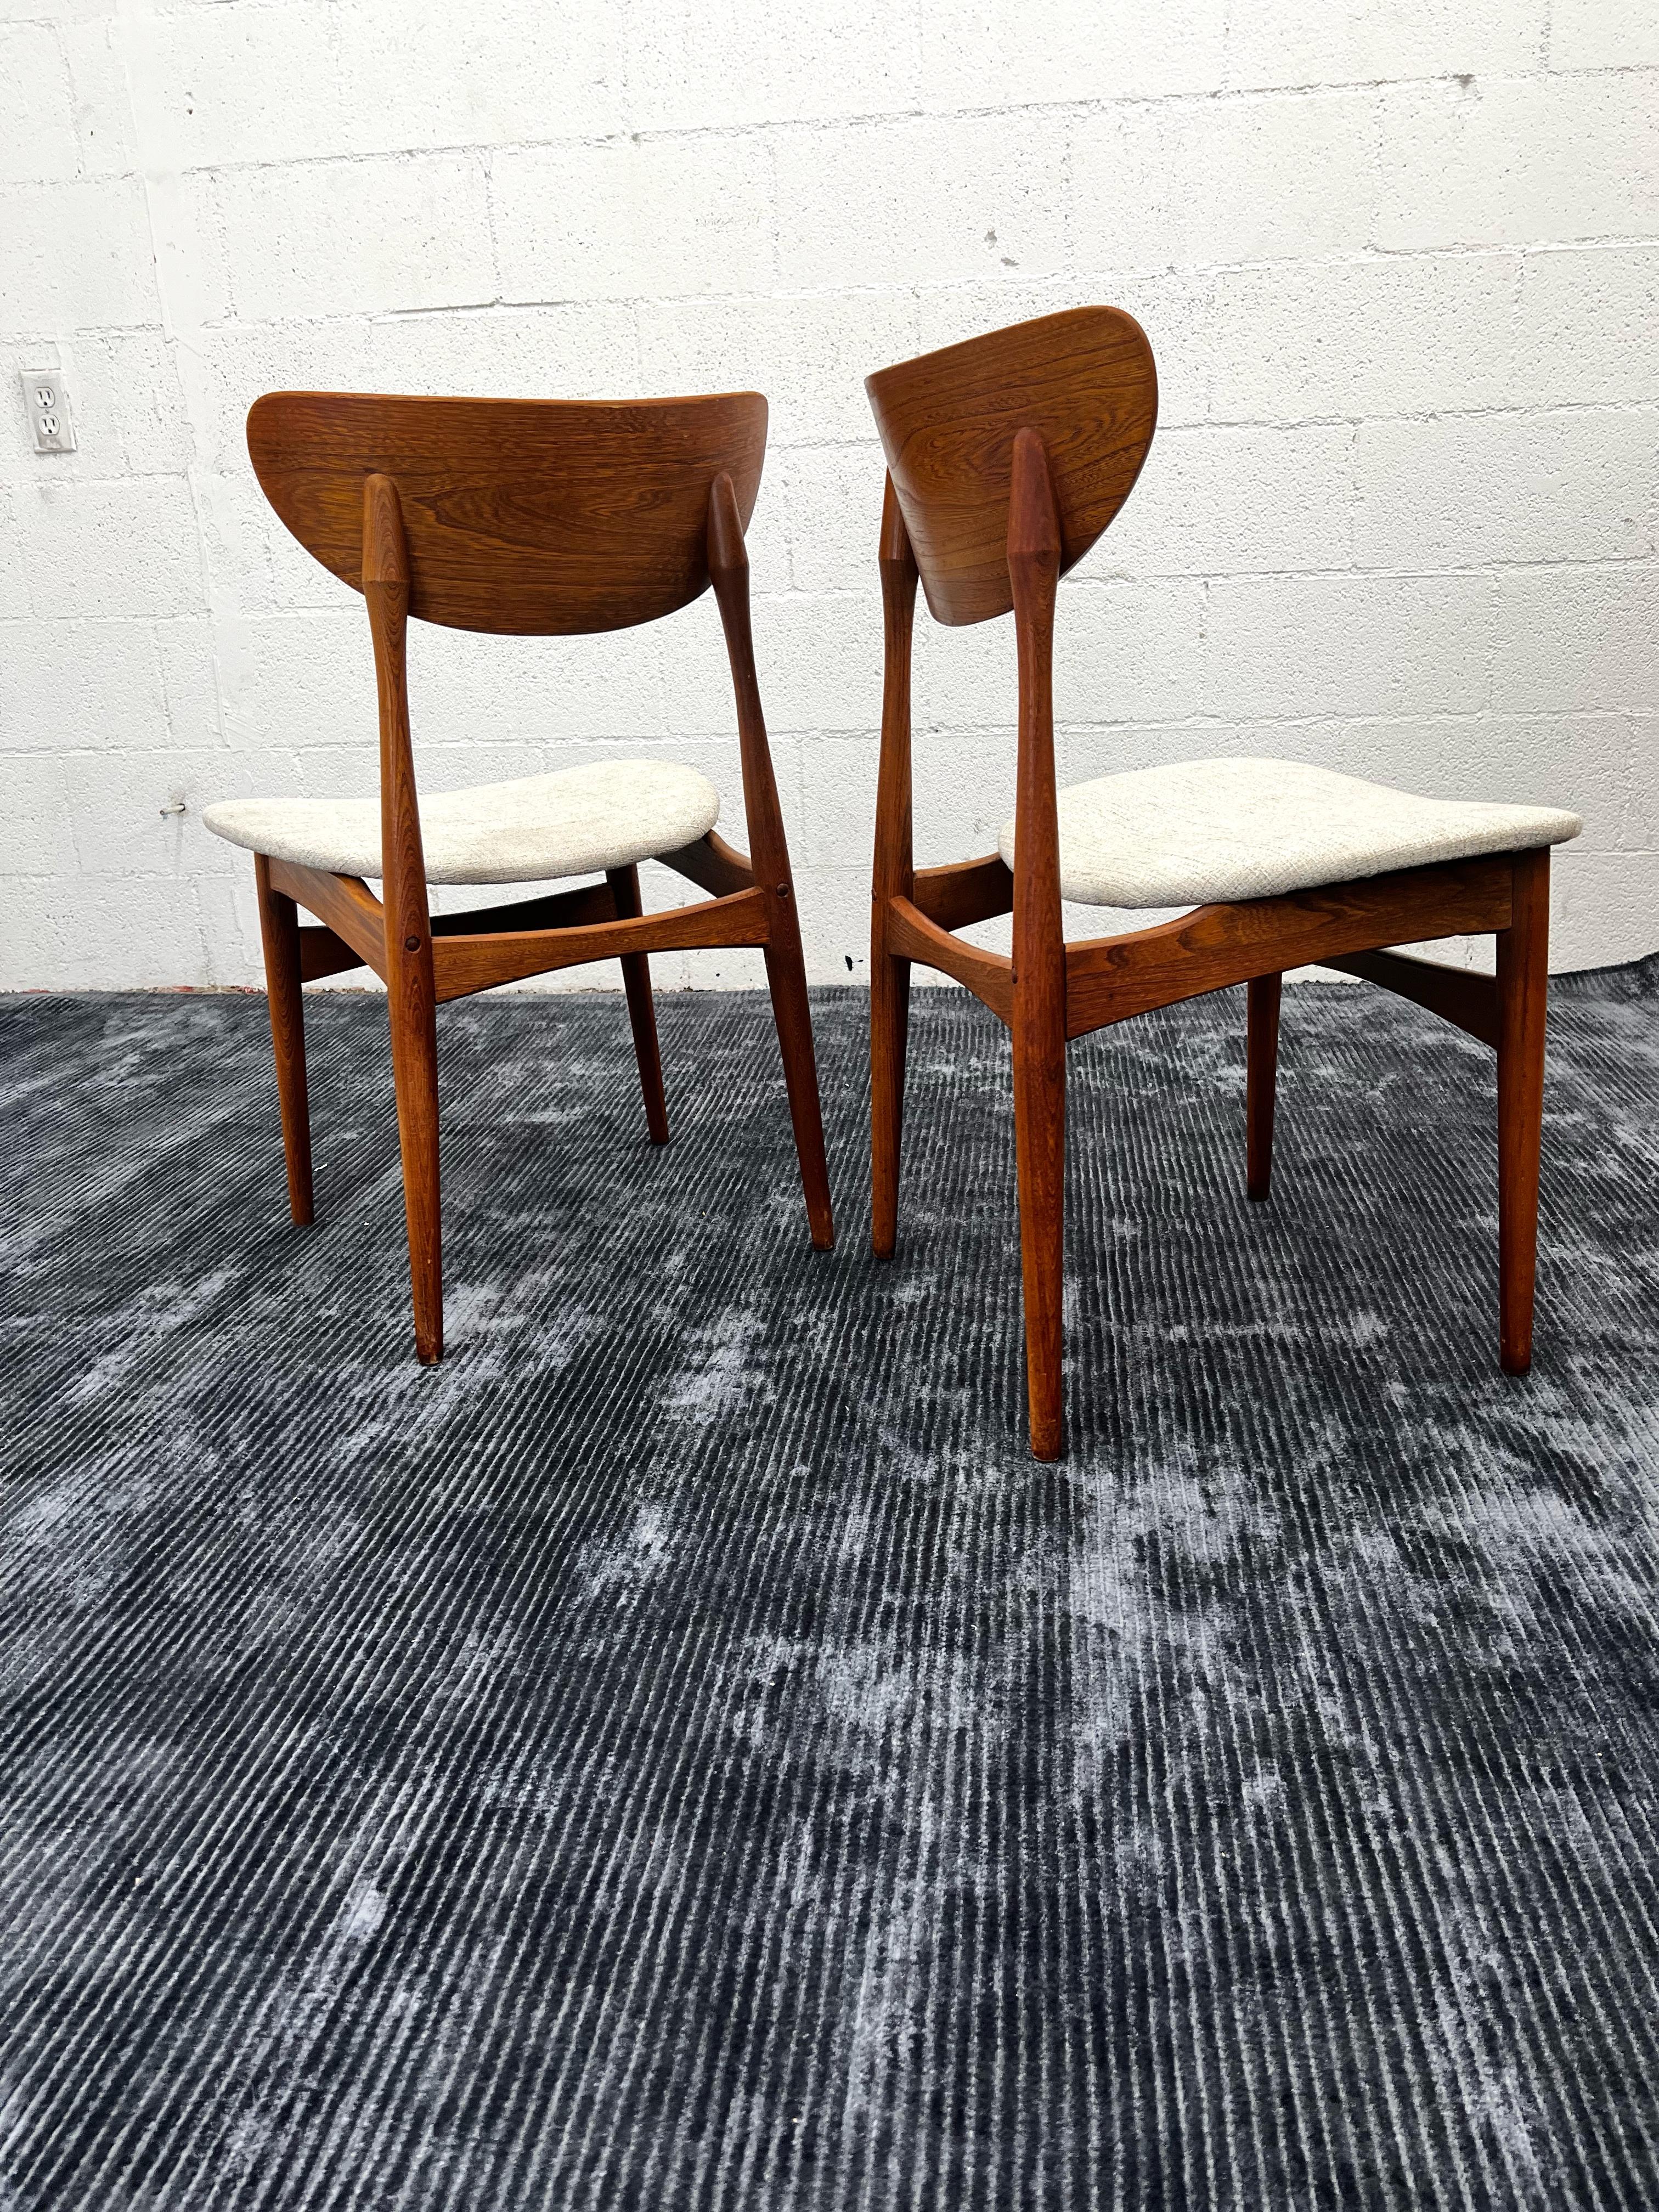 Solid teak dining chairs by the iconic Virtue Brothers of California. 
Newly upholstered with fabric by knoll, “Diva Moon” 
Set of three in In newly restored condition.